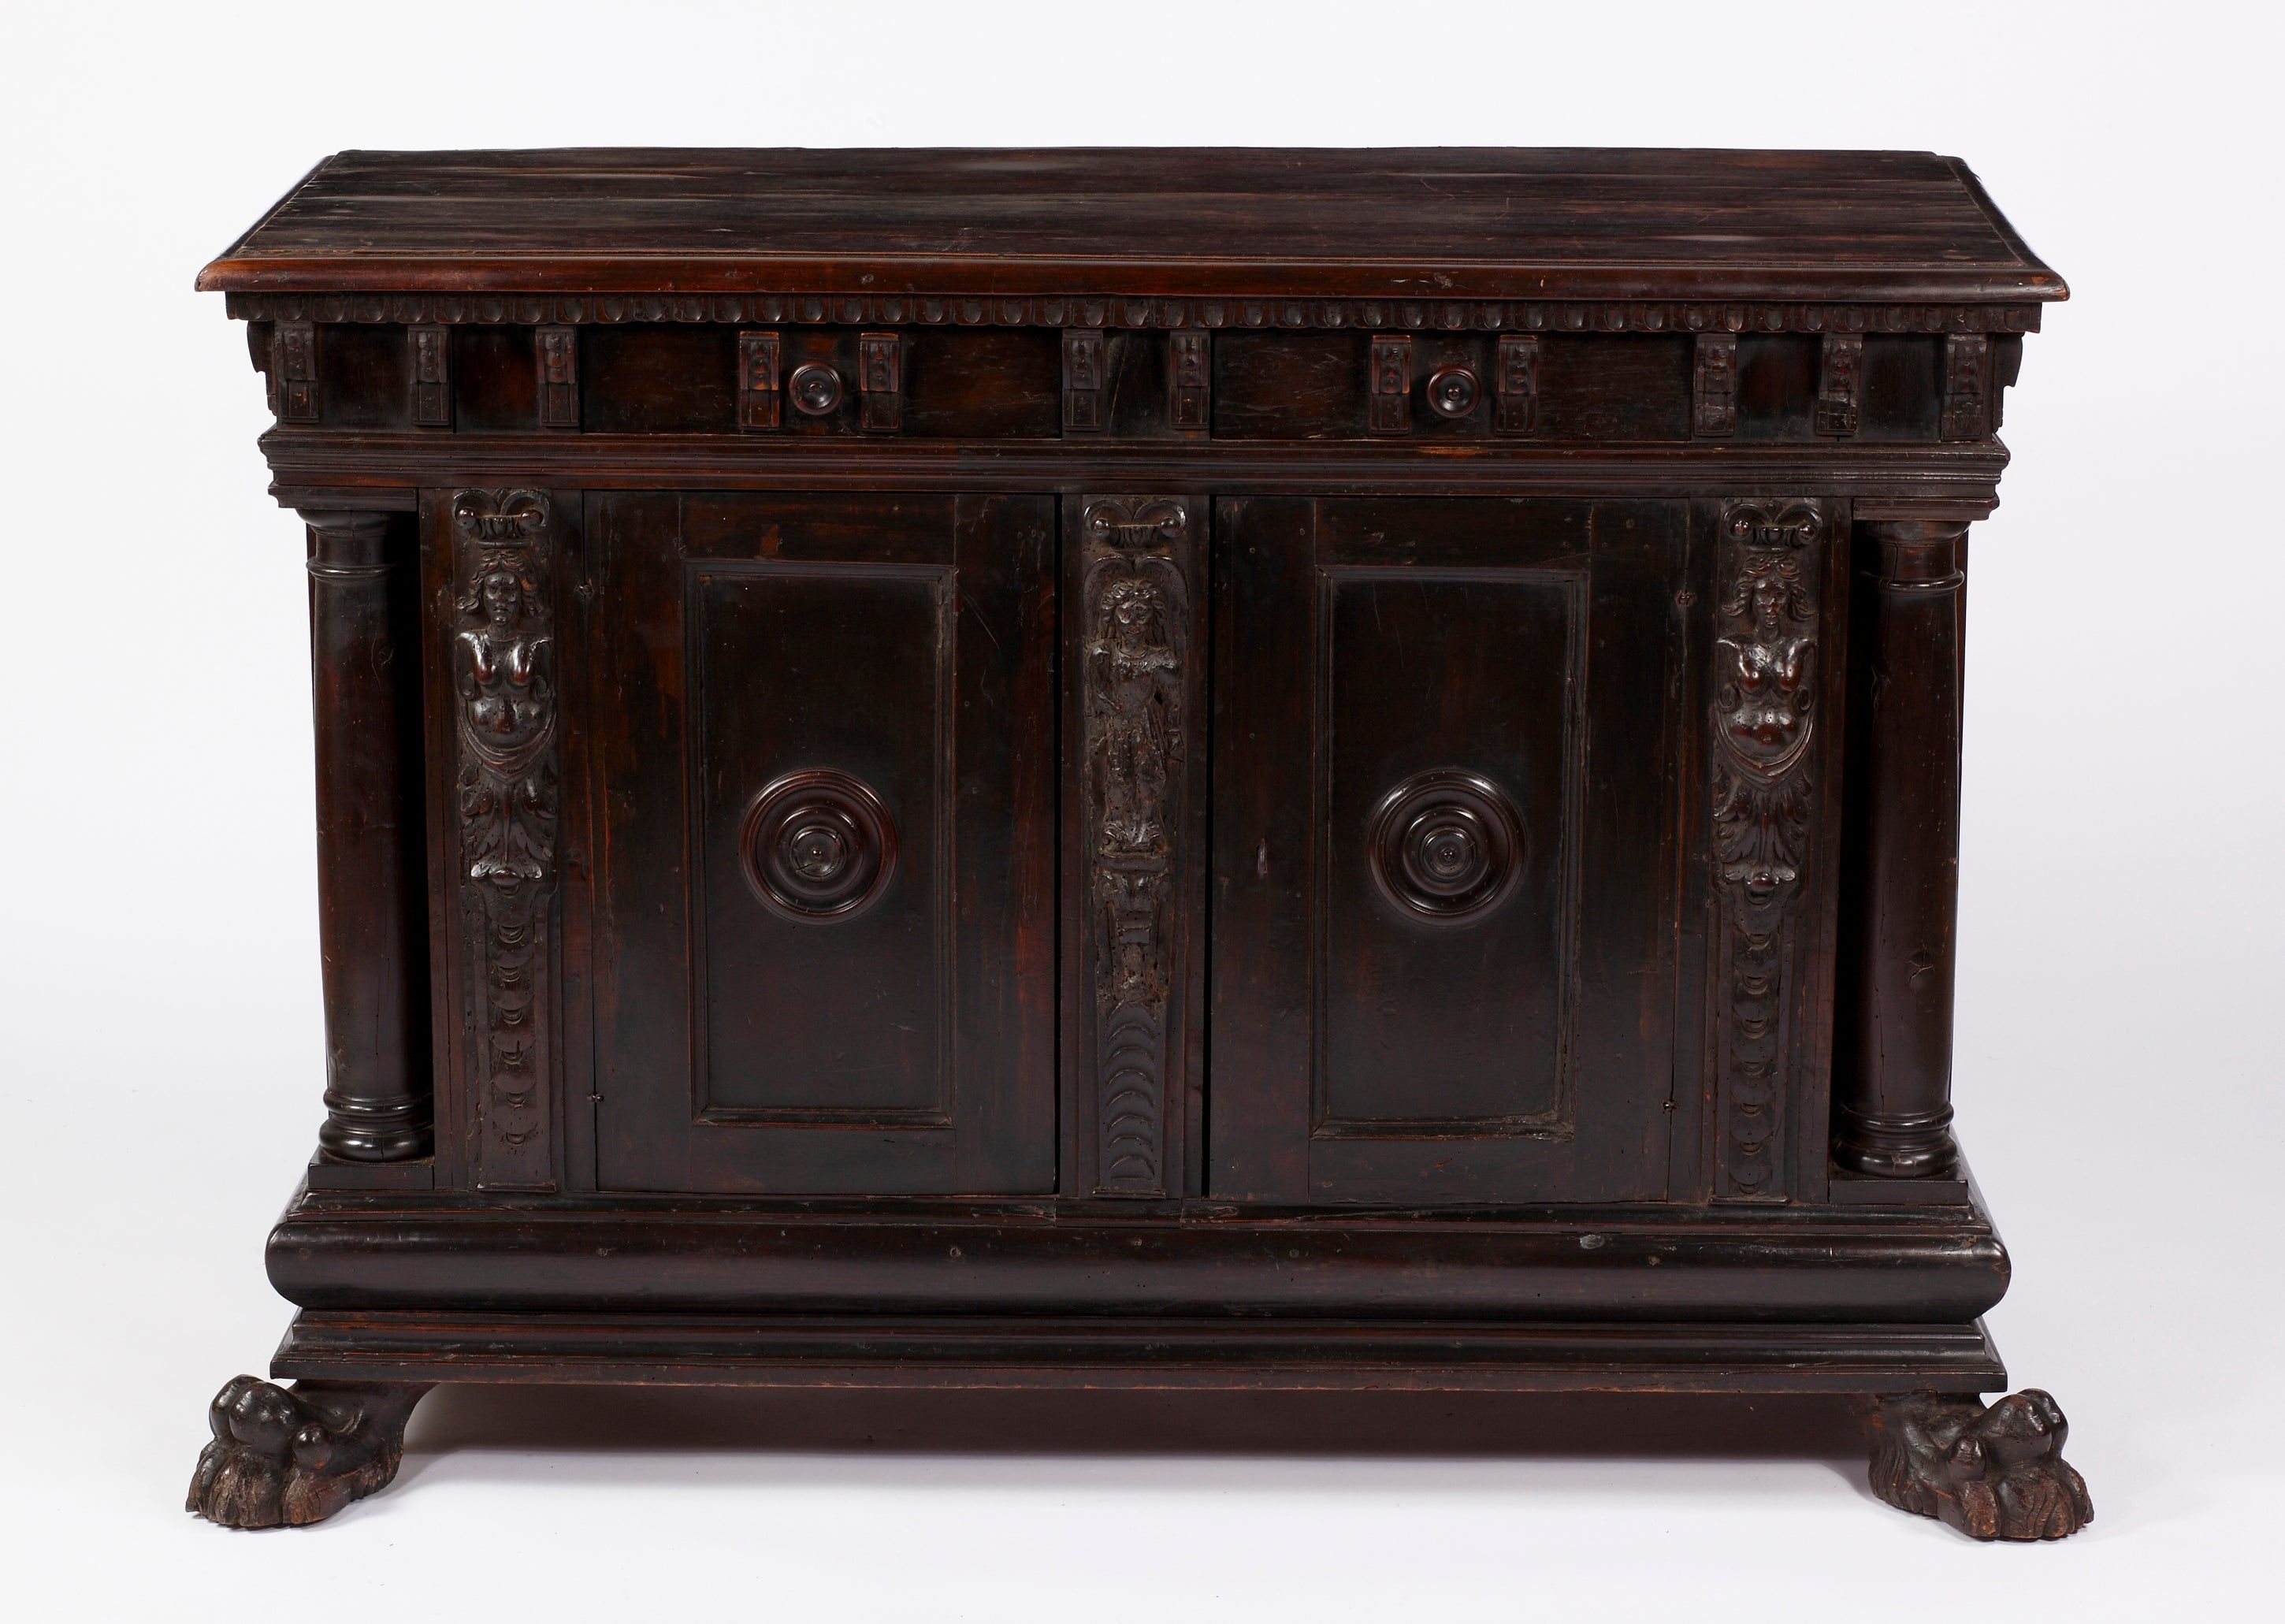 Stunning Ornate Louis Xv Style Kingwood Veneer And Marquetry Credenza Intended For Floral Beauty Credenzas (View 30 of 30)